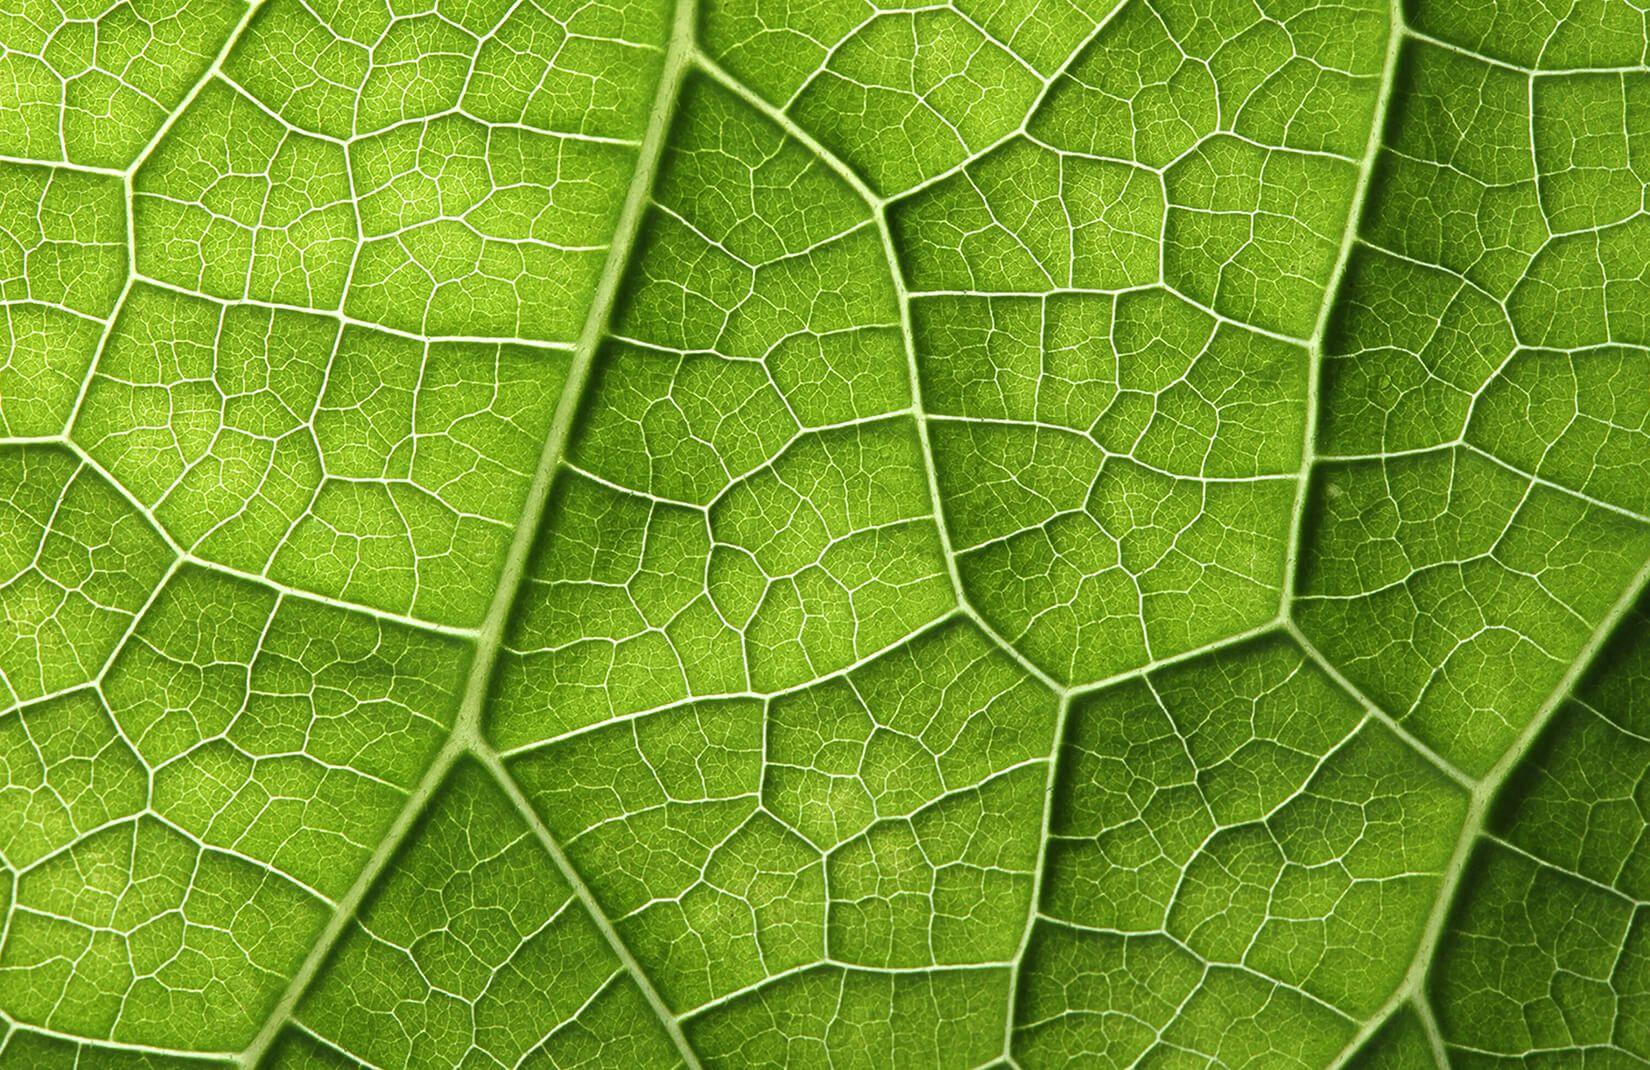 Leaf Texture Wallpapers - Top Free Leaf Texture Backgrounds